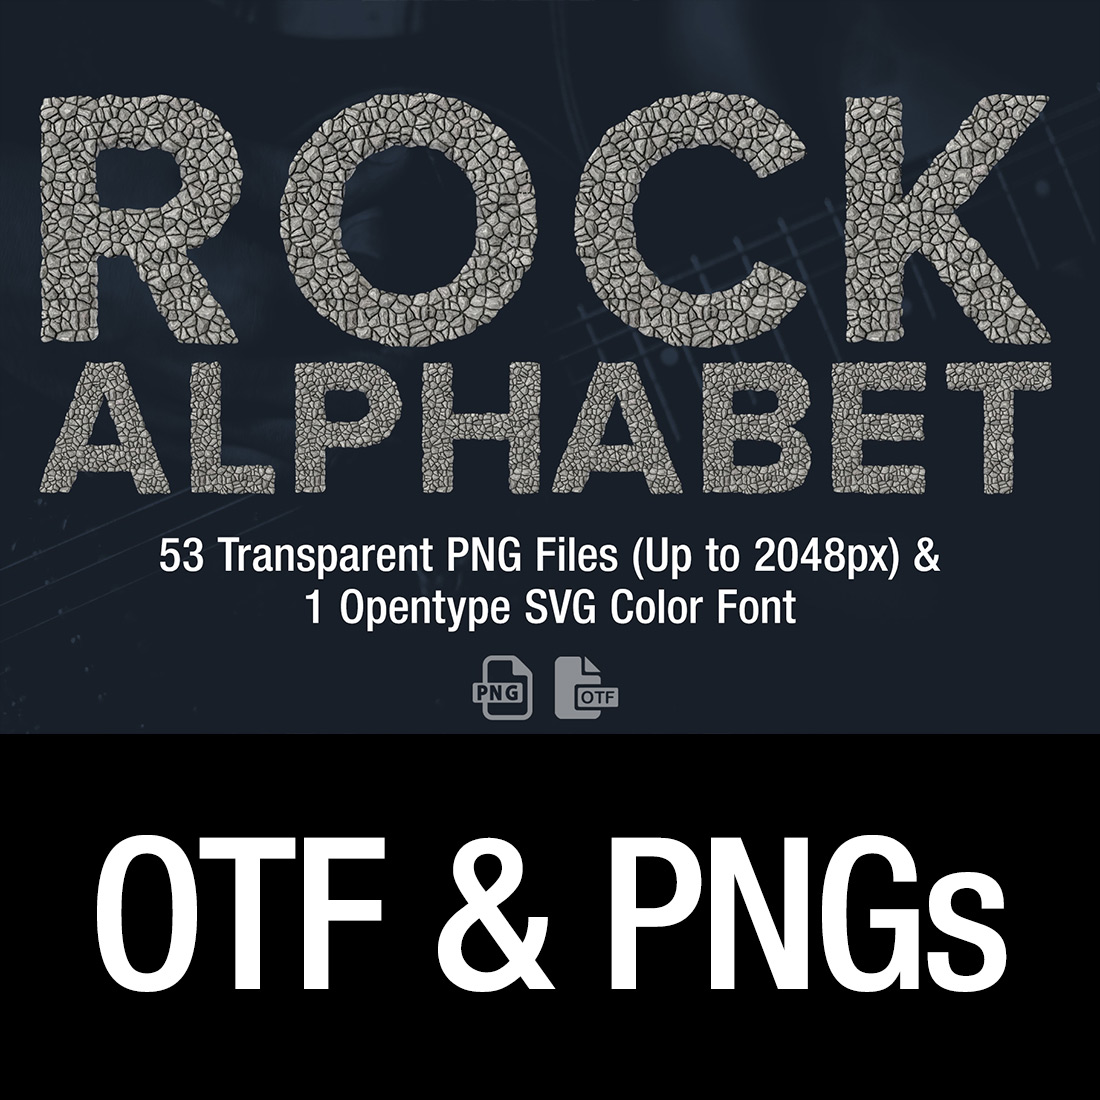 MS Rock Opentype SVG Font and PNG cover image.